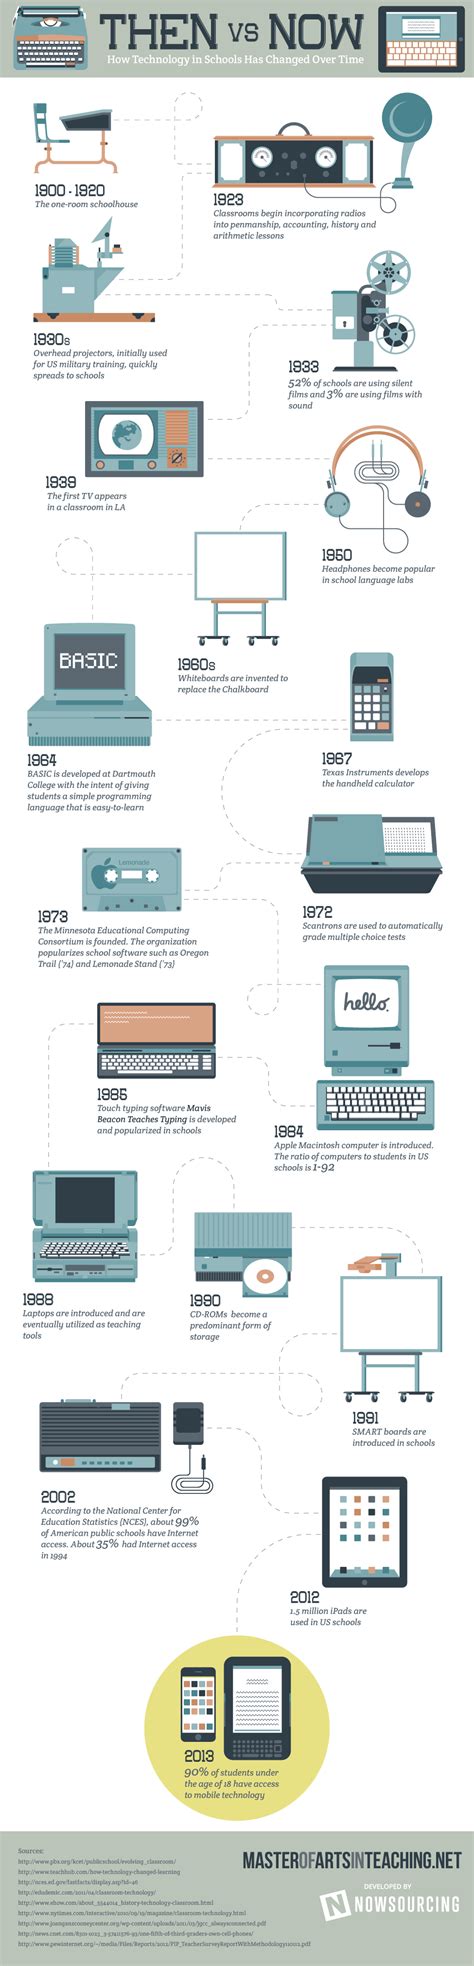 Then Vs Now How Technology In Schools Has Changed Over Time Infographic